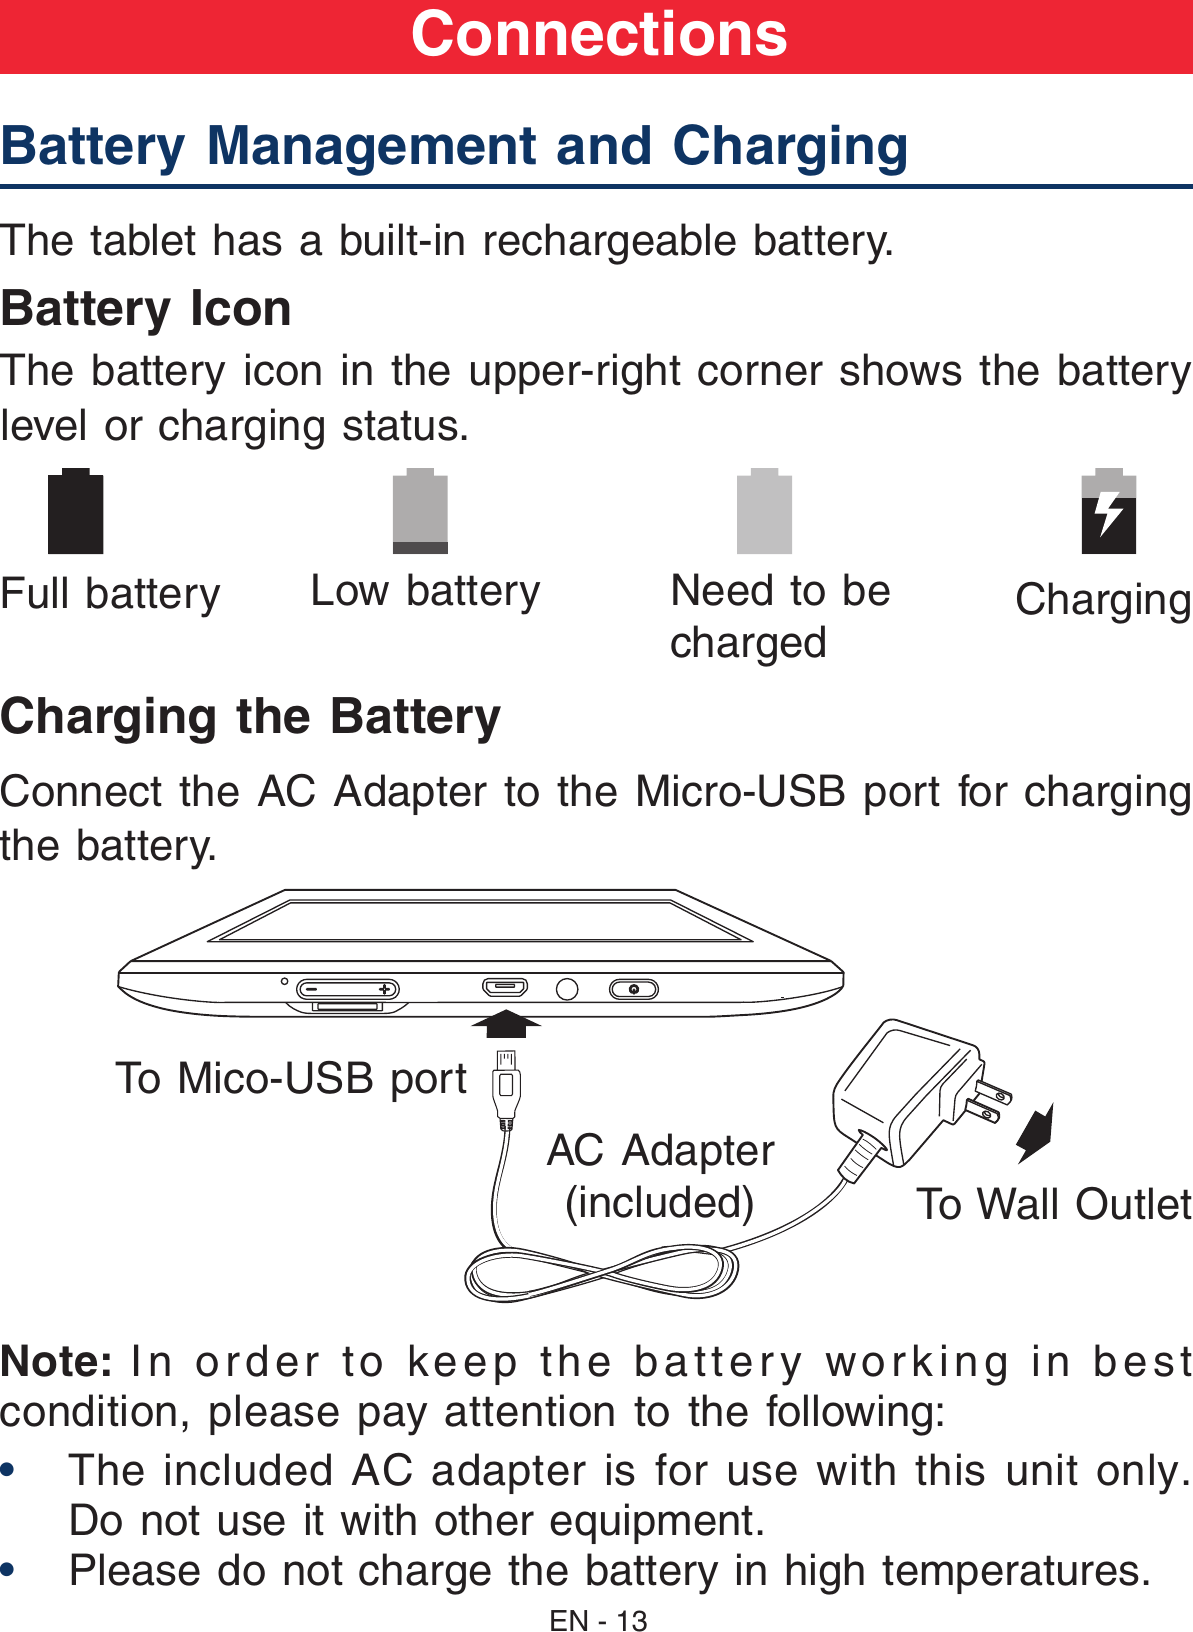 Battery Management and Charging  The tablet has a built-in rechargeable battery.Battery IconThe battery icon in the upper-right corner shows the battery level or charging status.Charging the BatteryConnect the AC Adapter to the Micro-USB port for charging the battery.Note:  In order to keep the battery working in best condition, please pay attention to the following:•  The  included  AC  adapter is  for  use  with  this unit  only. Do not use it with other equipment.•  Please do not charge the battery in high temperatures.      Full battery Low battery  Need to be chargedCharging AC Adapter(included)  To Wall OutletTo Mico-USB portConnectionsEN - 13